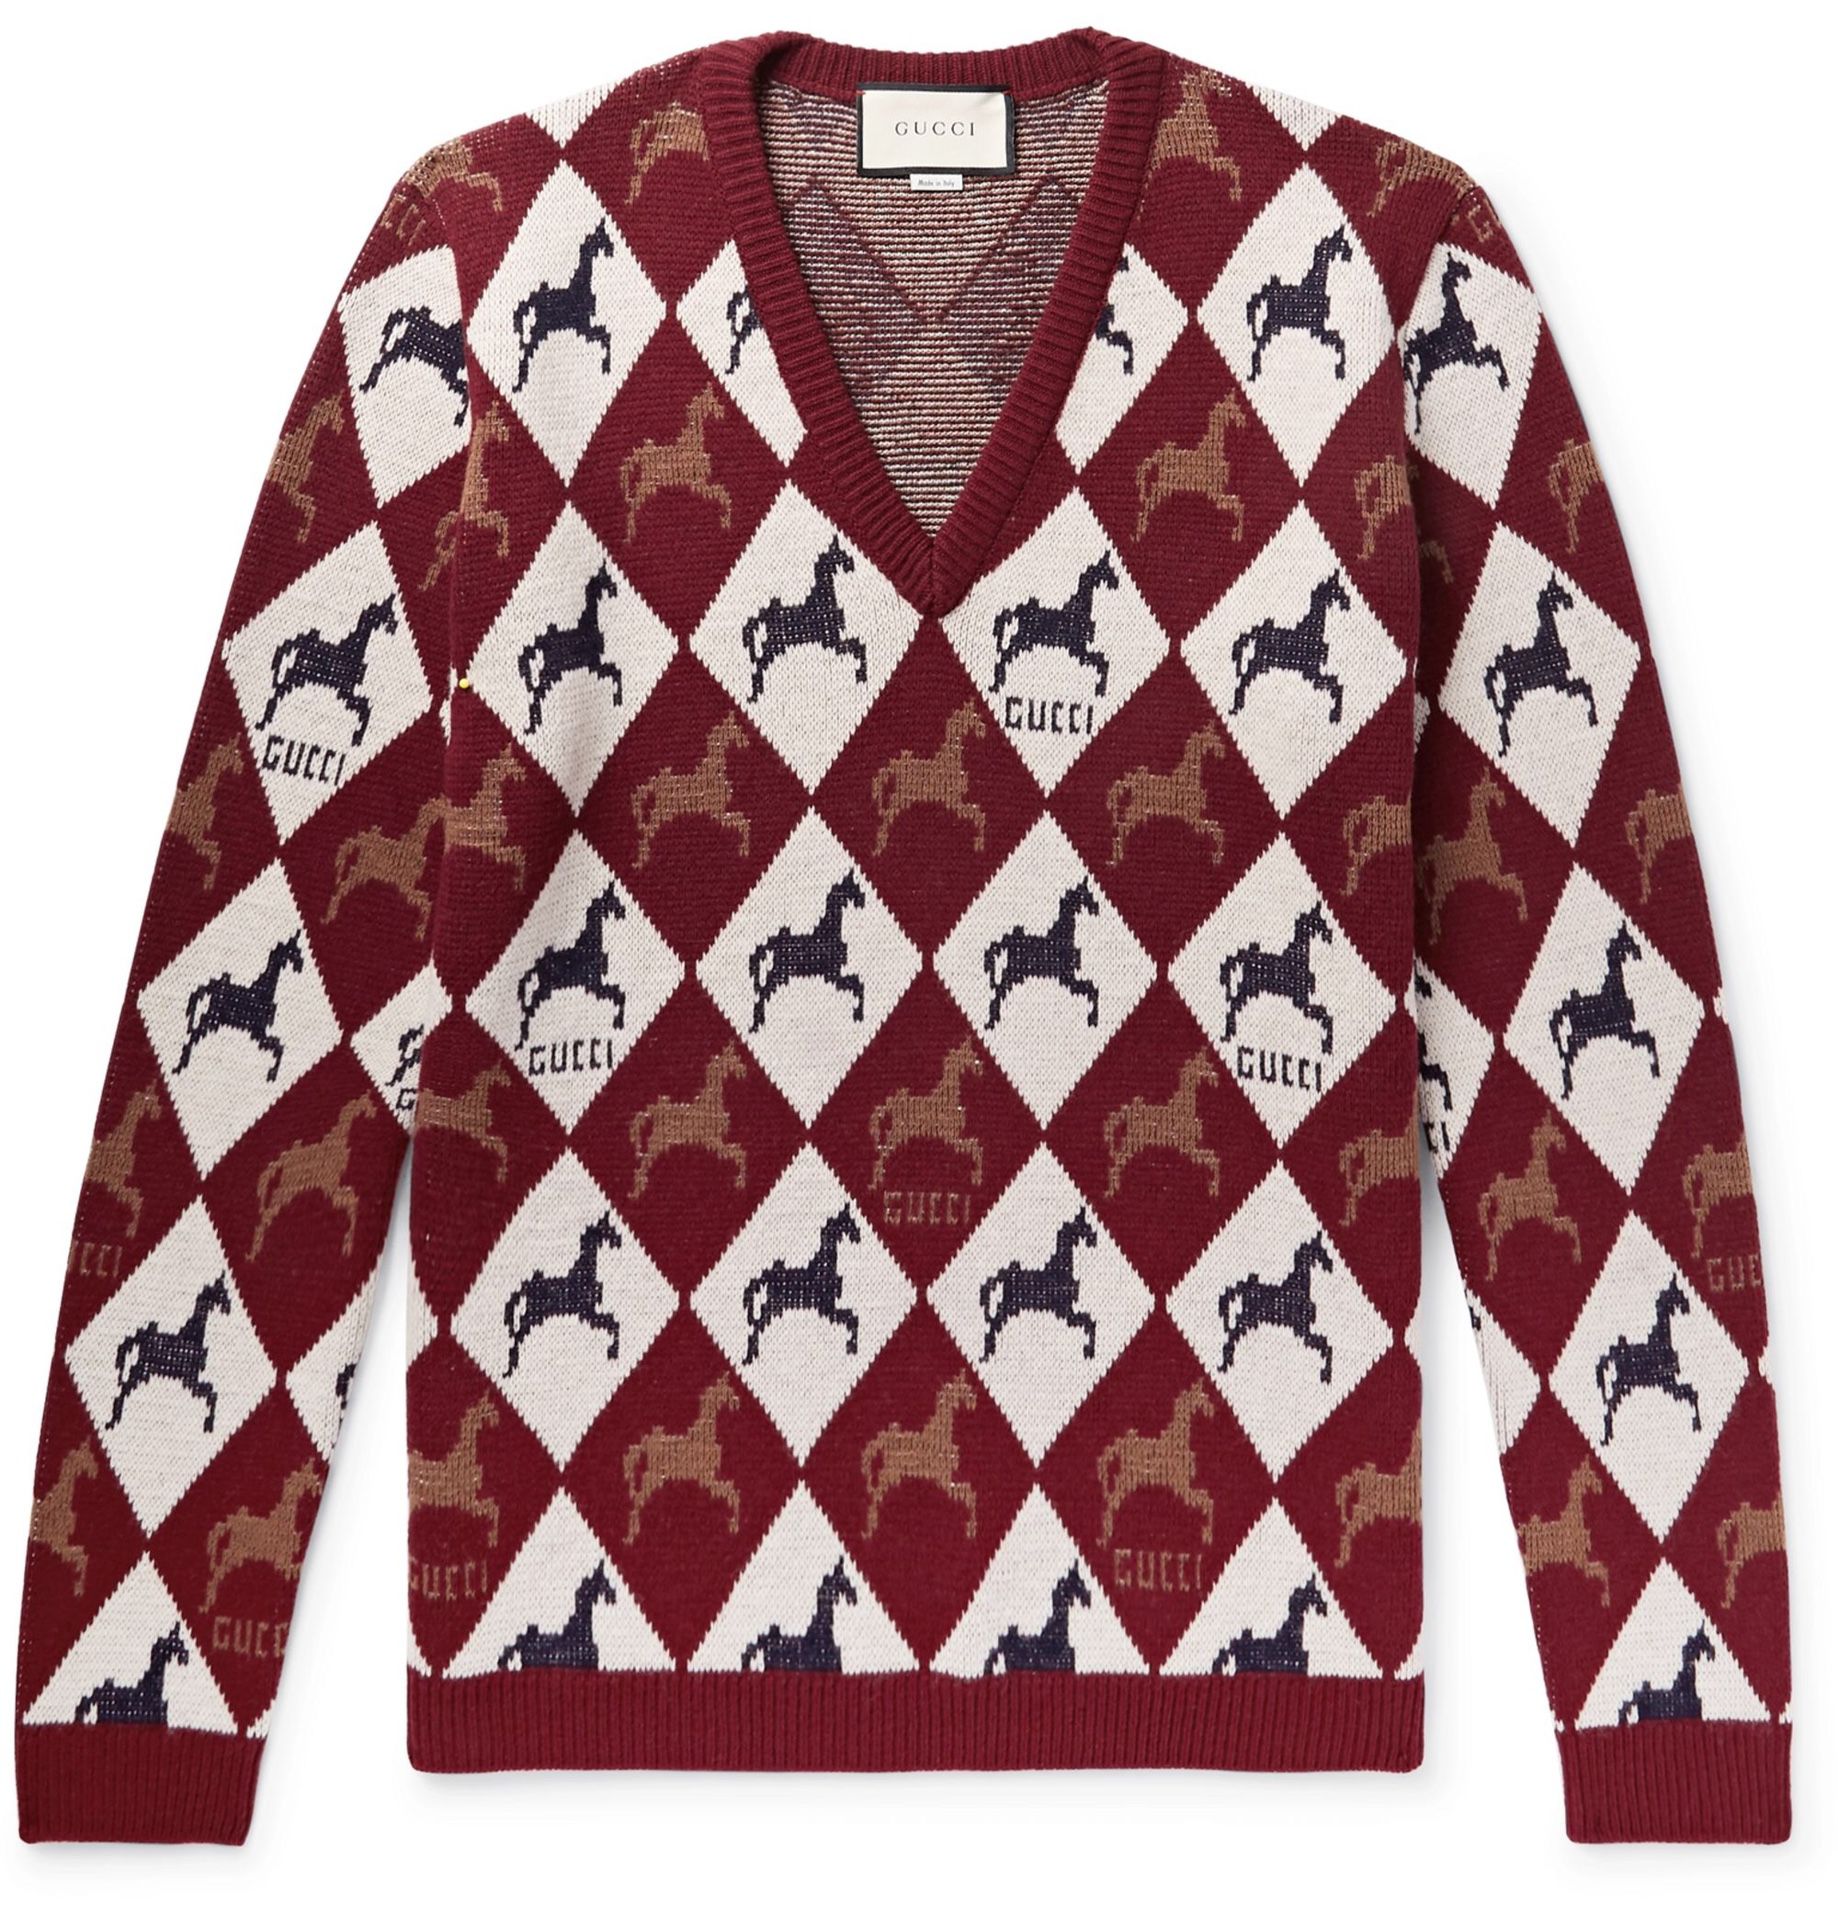 Men’s GUCCI Horse Argyle Sweater Small NEW